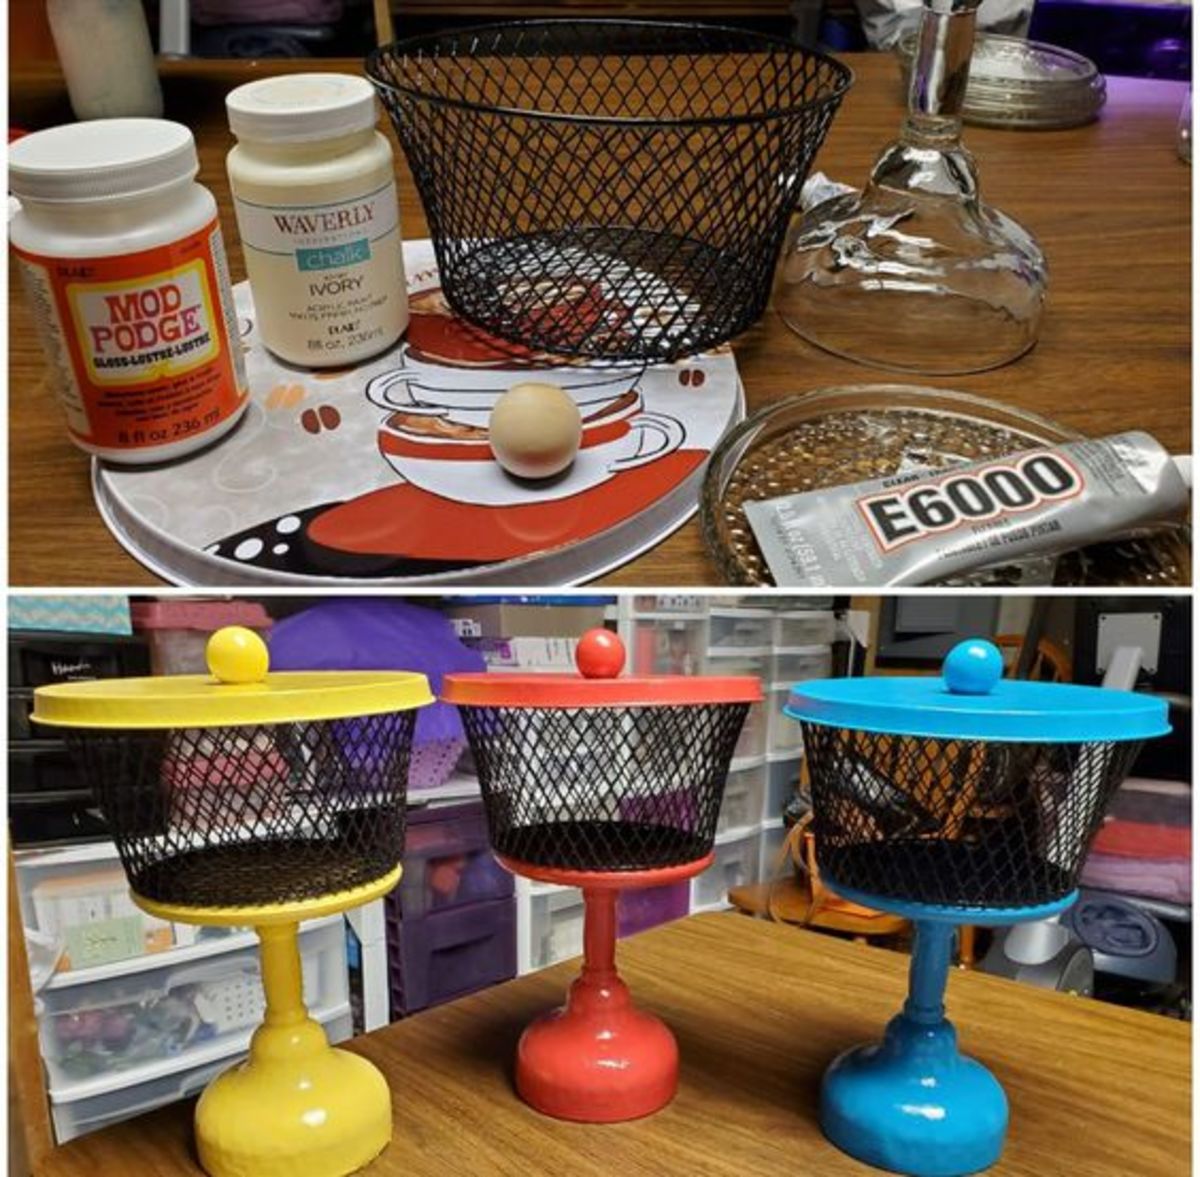 The before and after on these baskets is so cute!